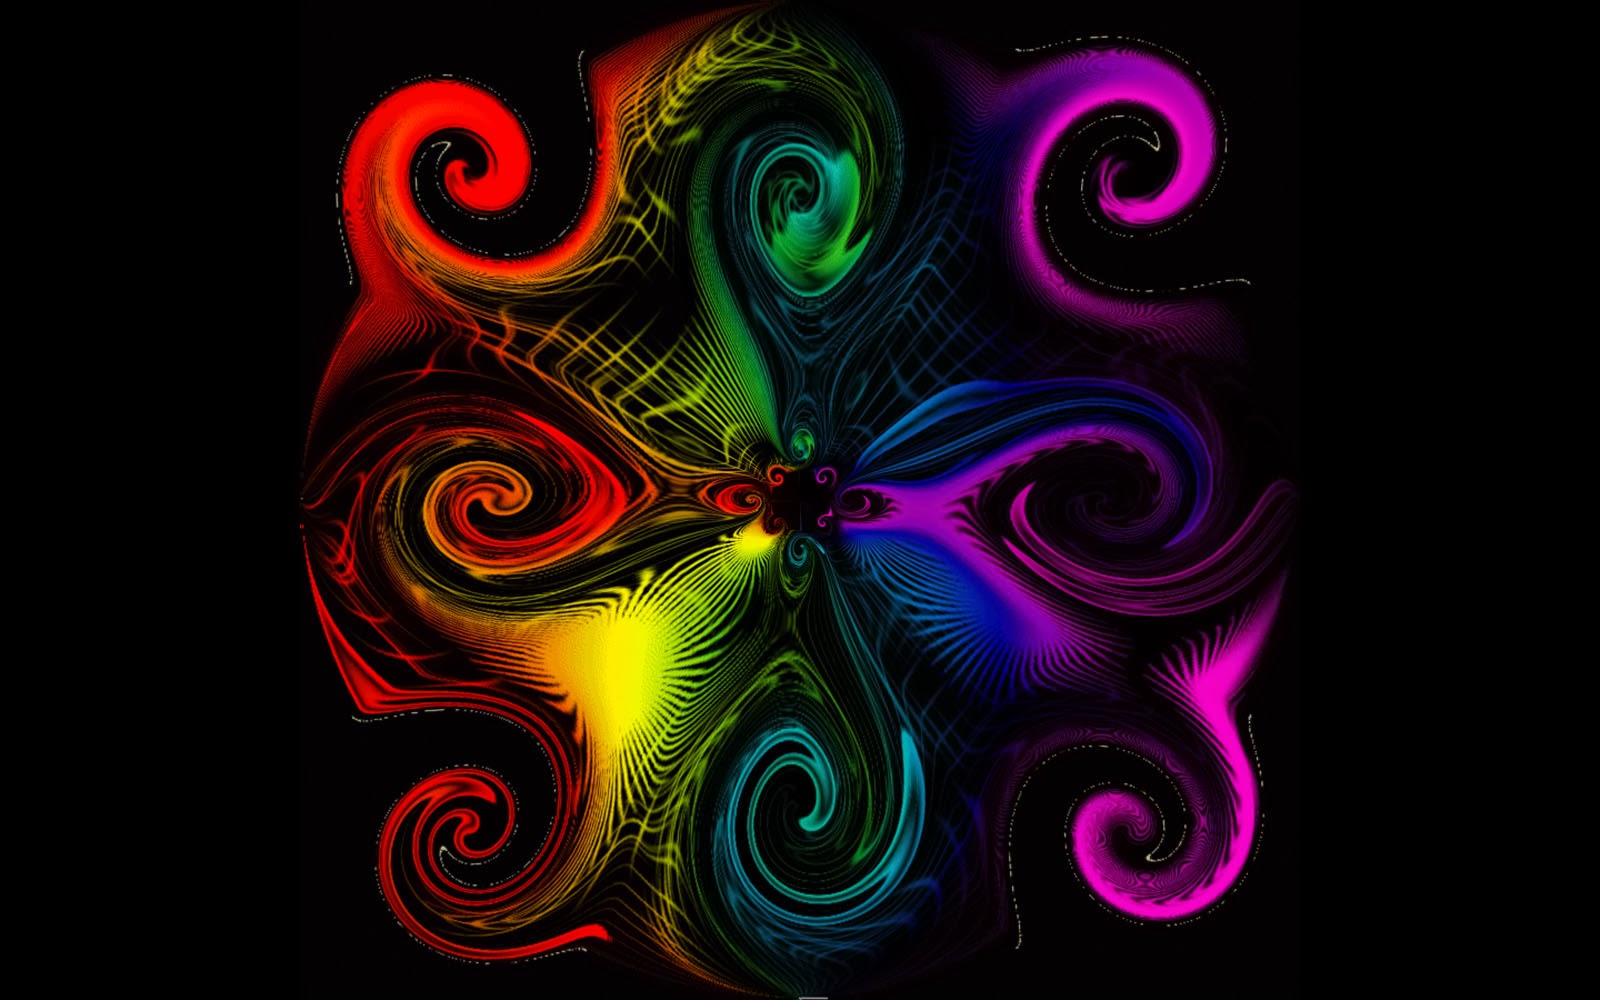 Wallpapers Colorful Swirls Wallpapers HD Wallpapers Download Free Map Images Wallpaper [wallpaper684.blogspot.com]